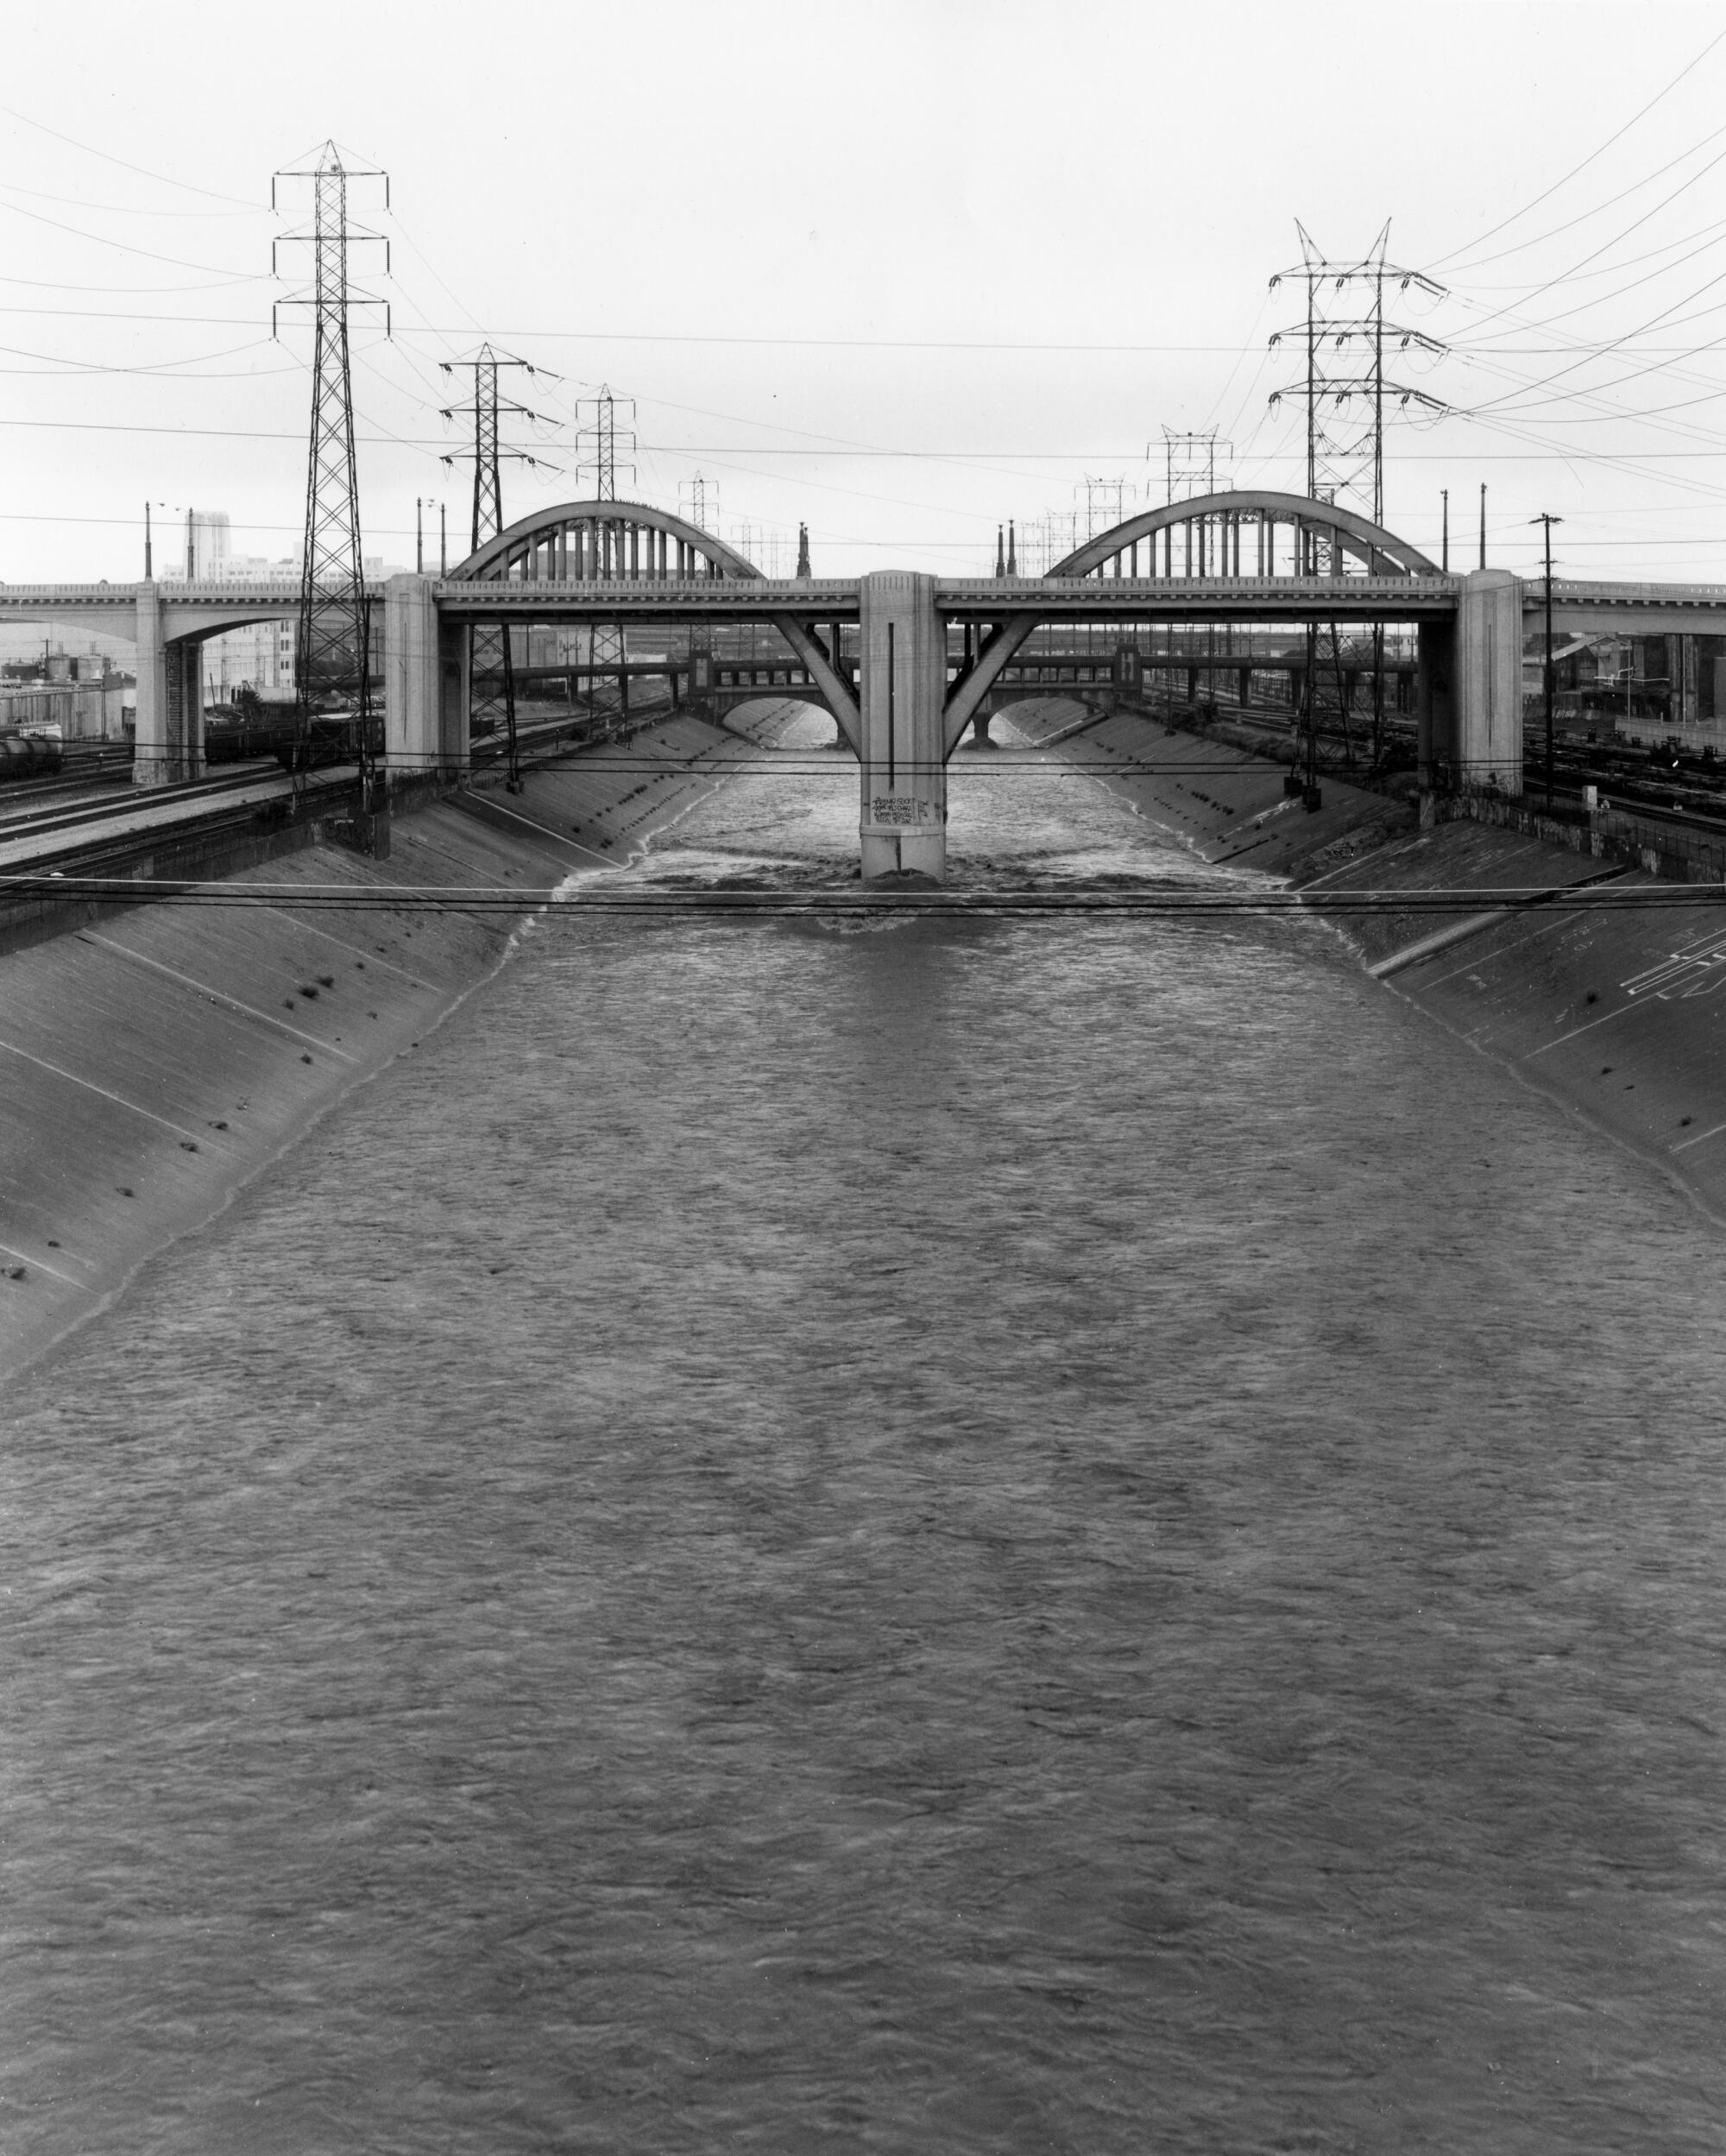 A black and white images shows the portion of the old 6th Street Viaduct running over the channelized L.A. River